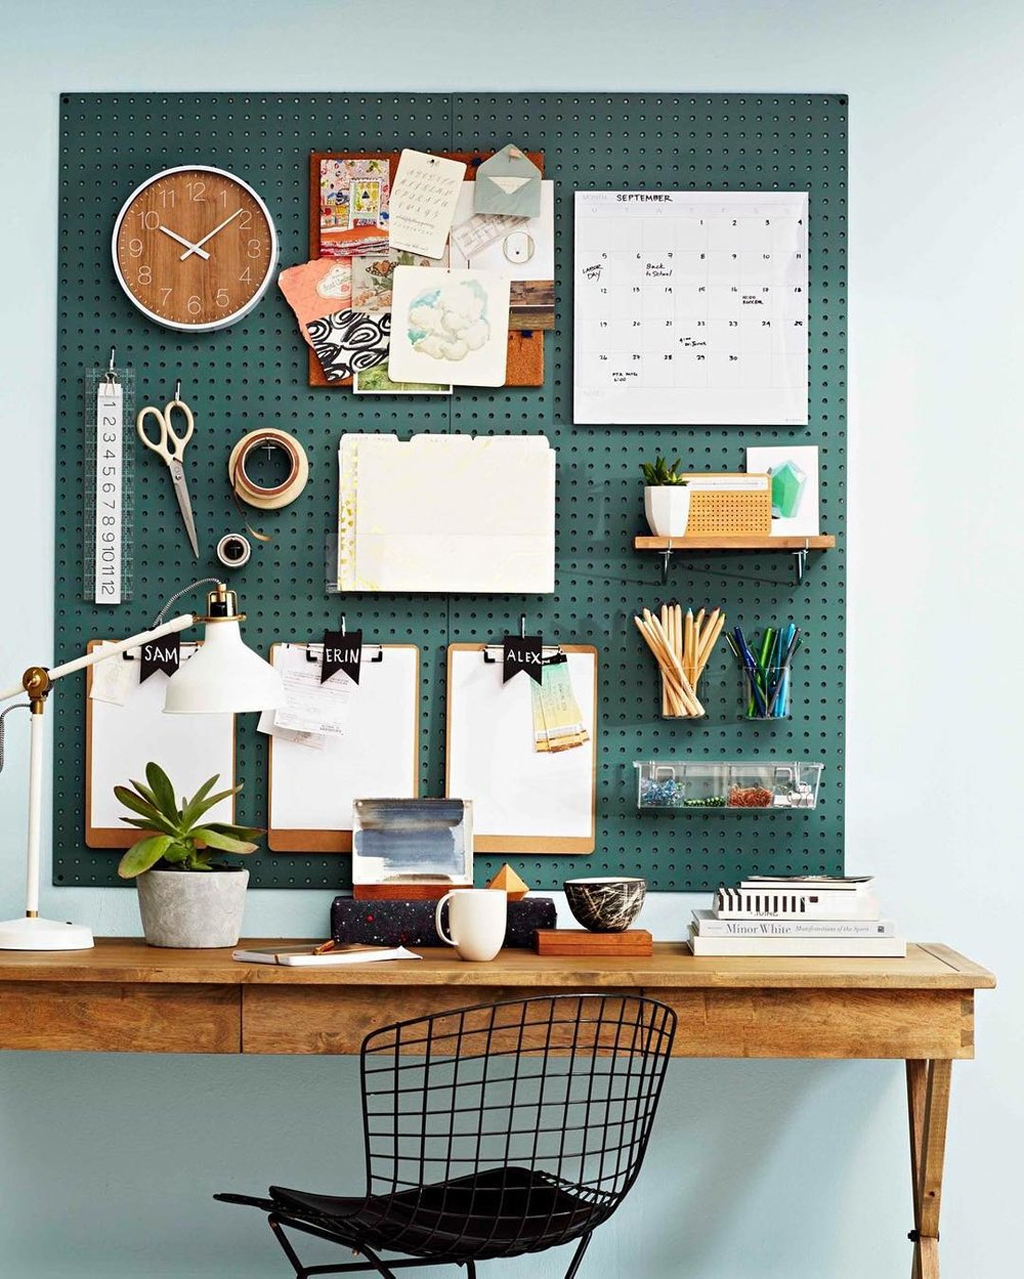 Tips and Decor Ideas For a Home Office Space - add mementoes and personal items.